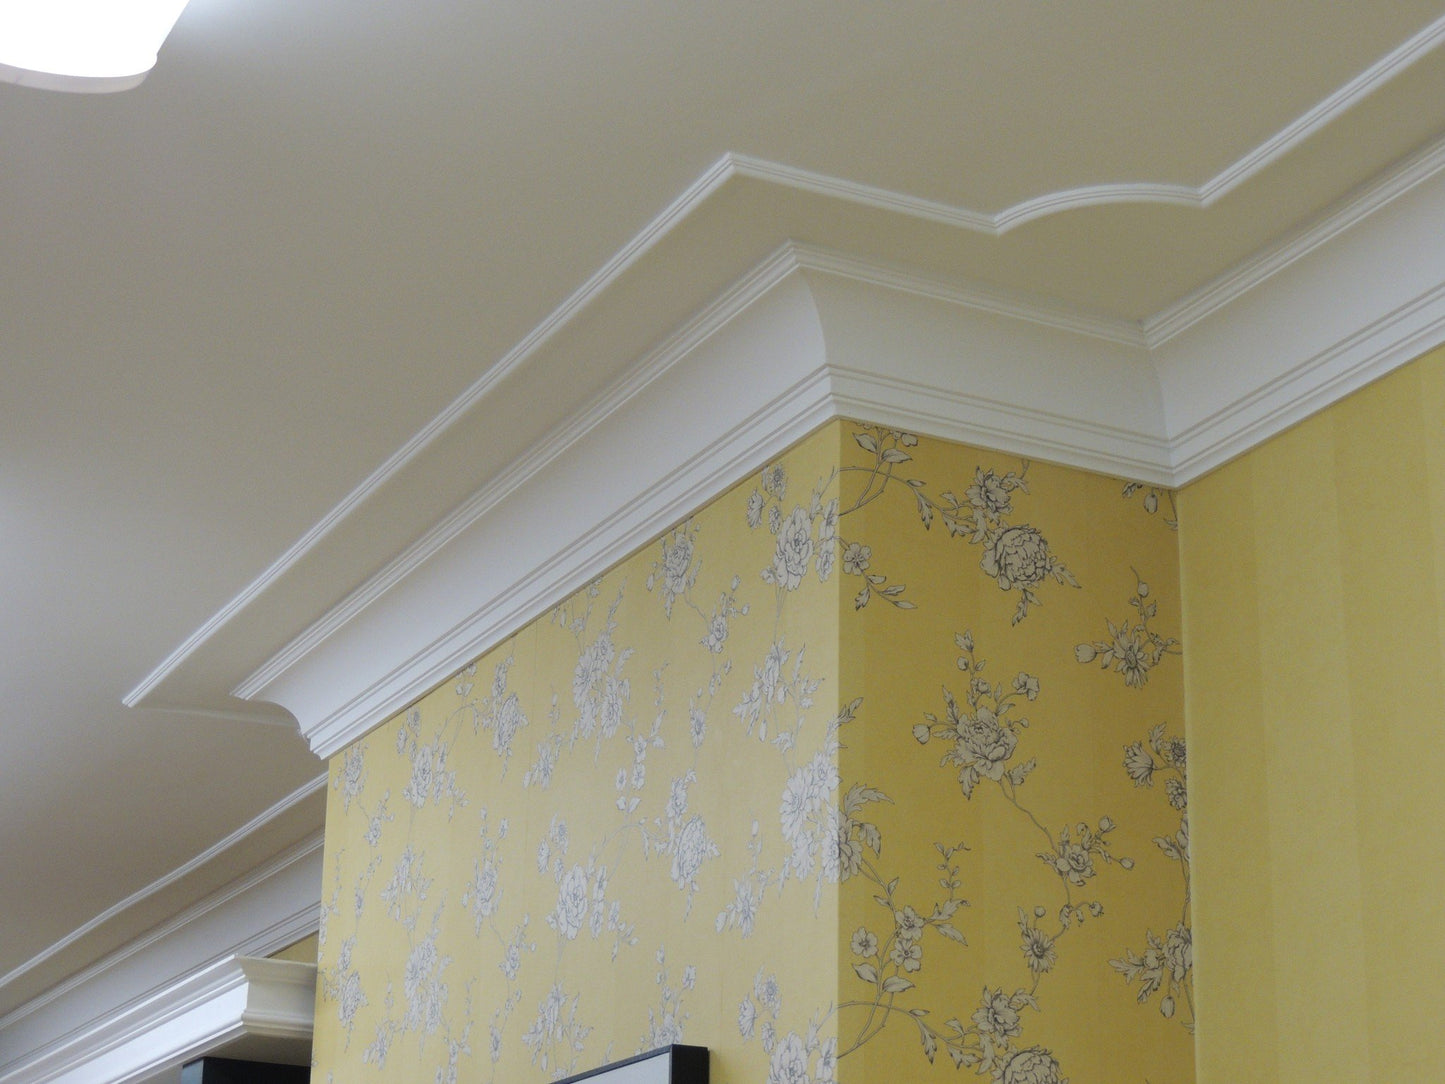 Tulip "Curved Corner" - Dado Rail installed in a room